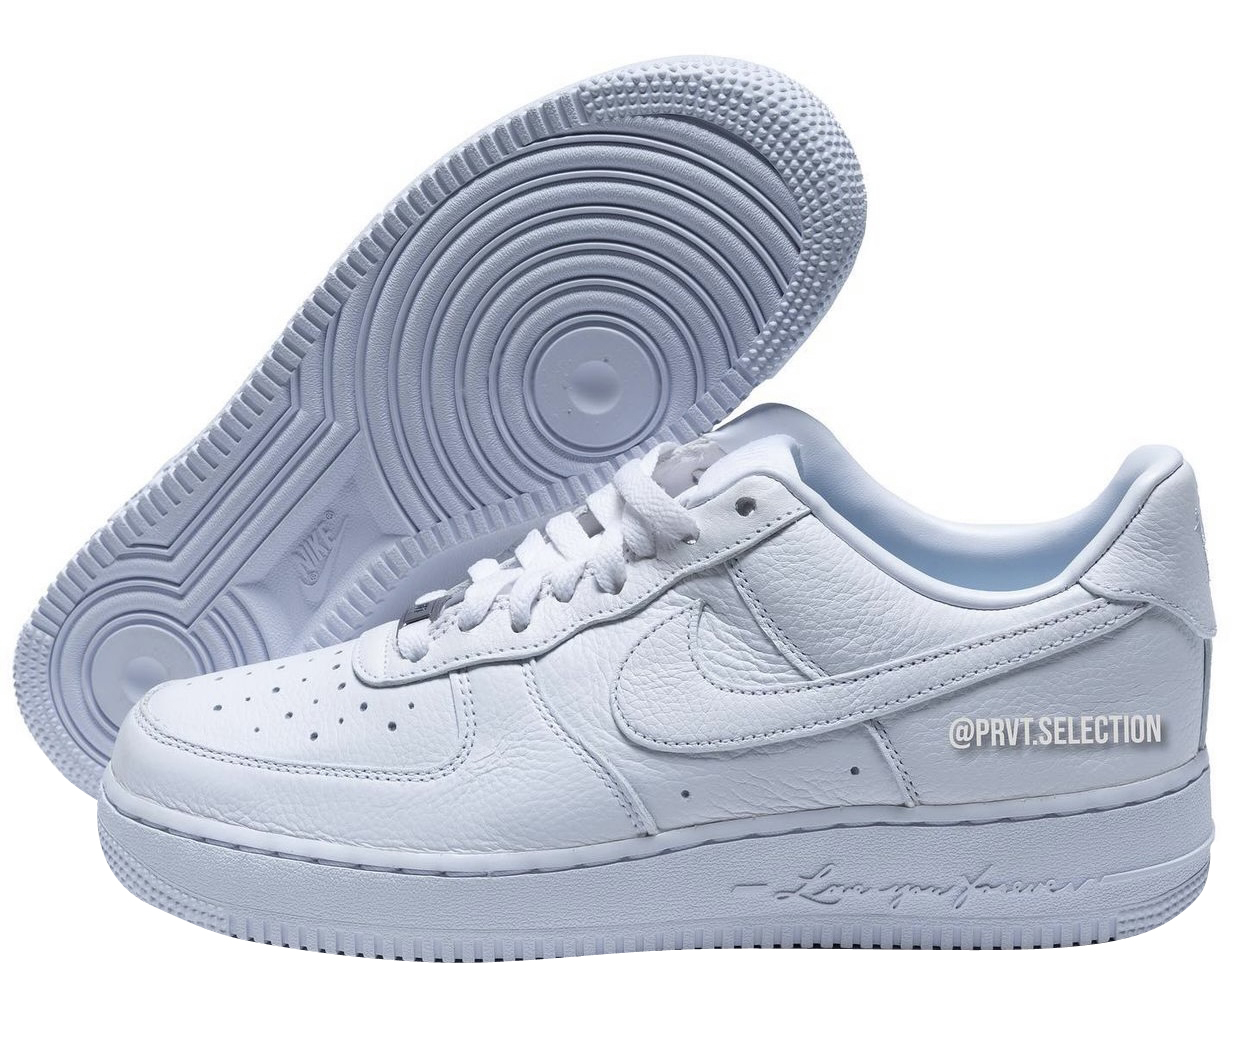 Where to Buy the Drake x Nike Air Force 1 Low “Certified Lover Boy”